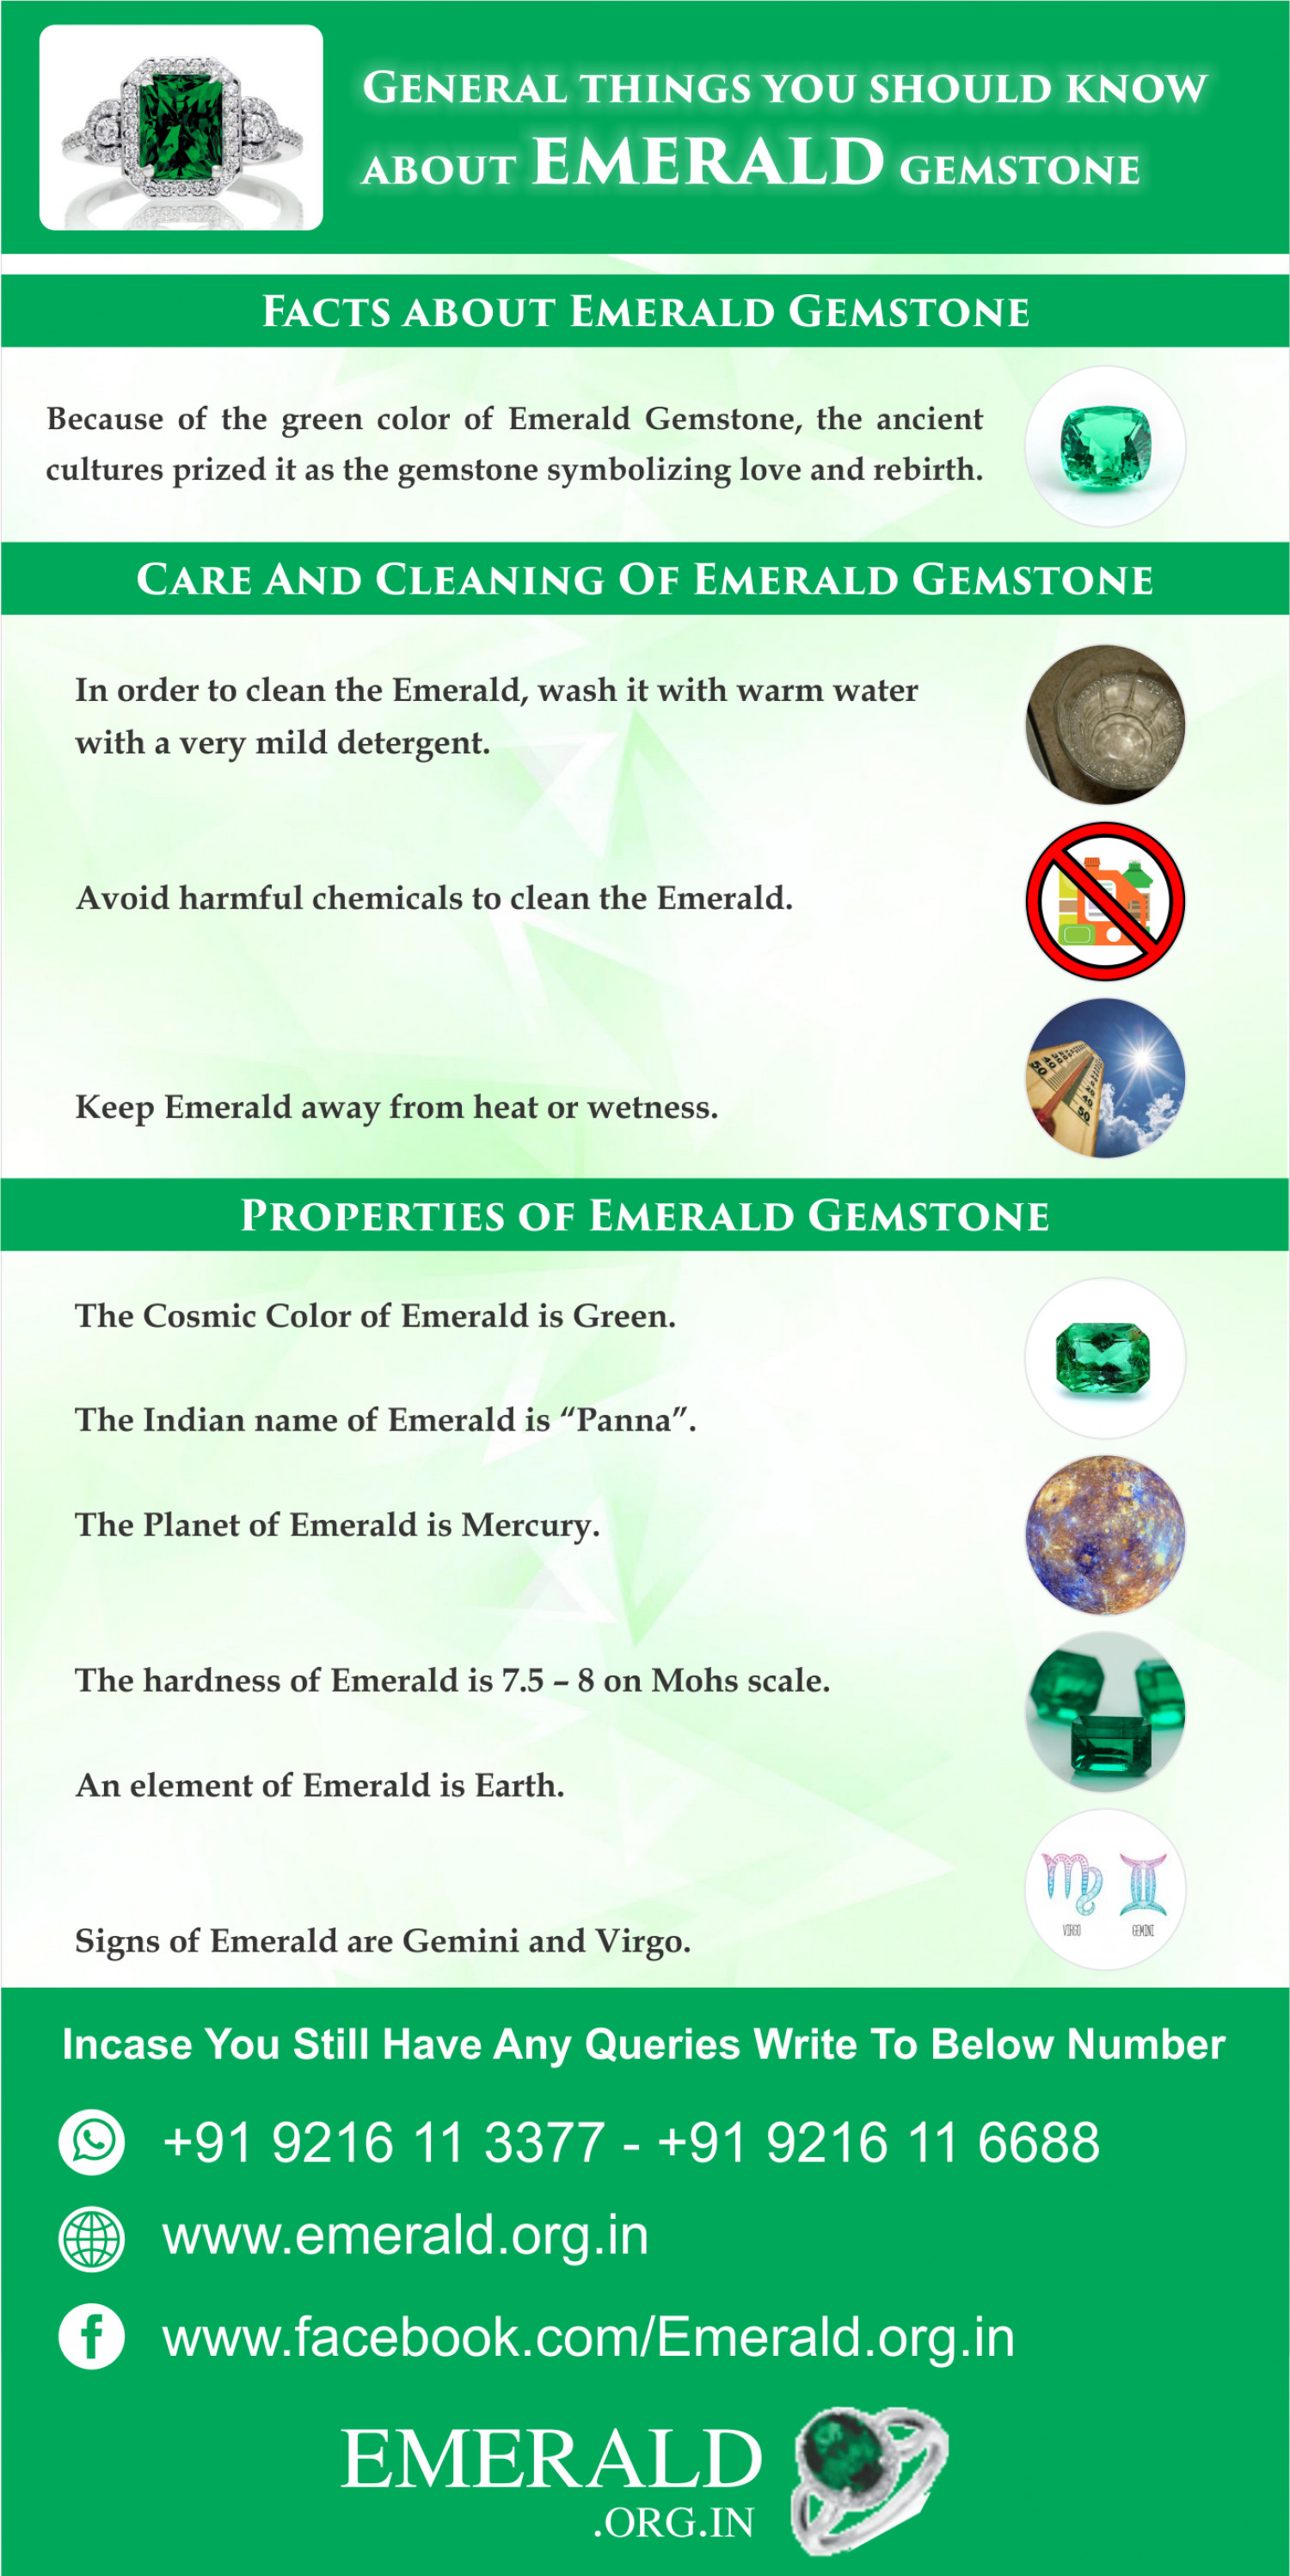 General things you should know about emerald gemstone Infographic